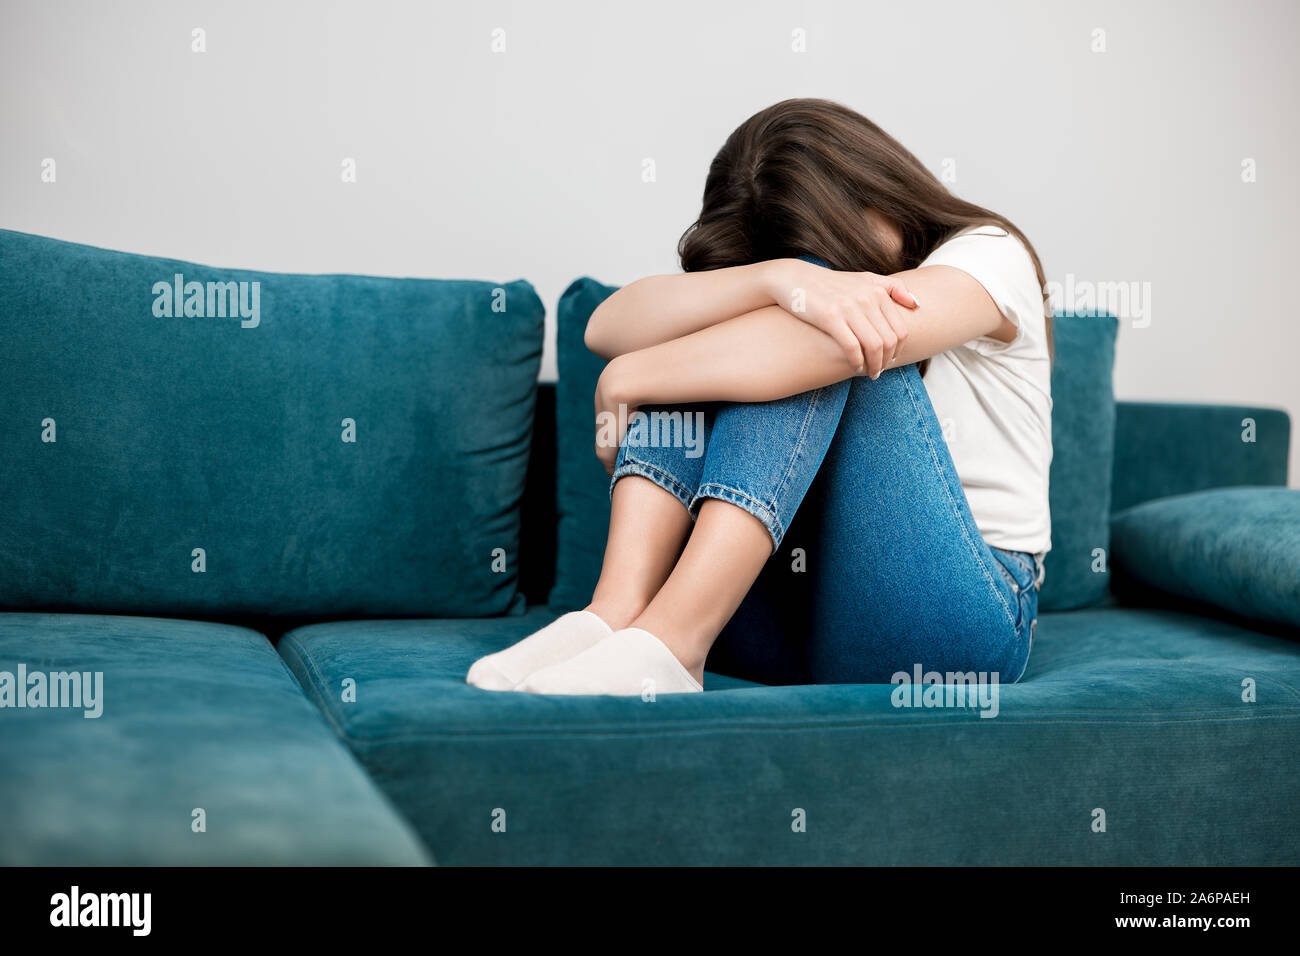 young woman crying feeling very depressed sitting on the sofa with her head down tough life Stock Photo